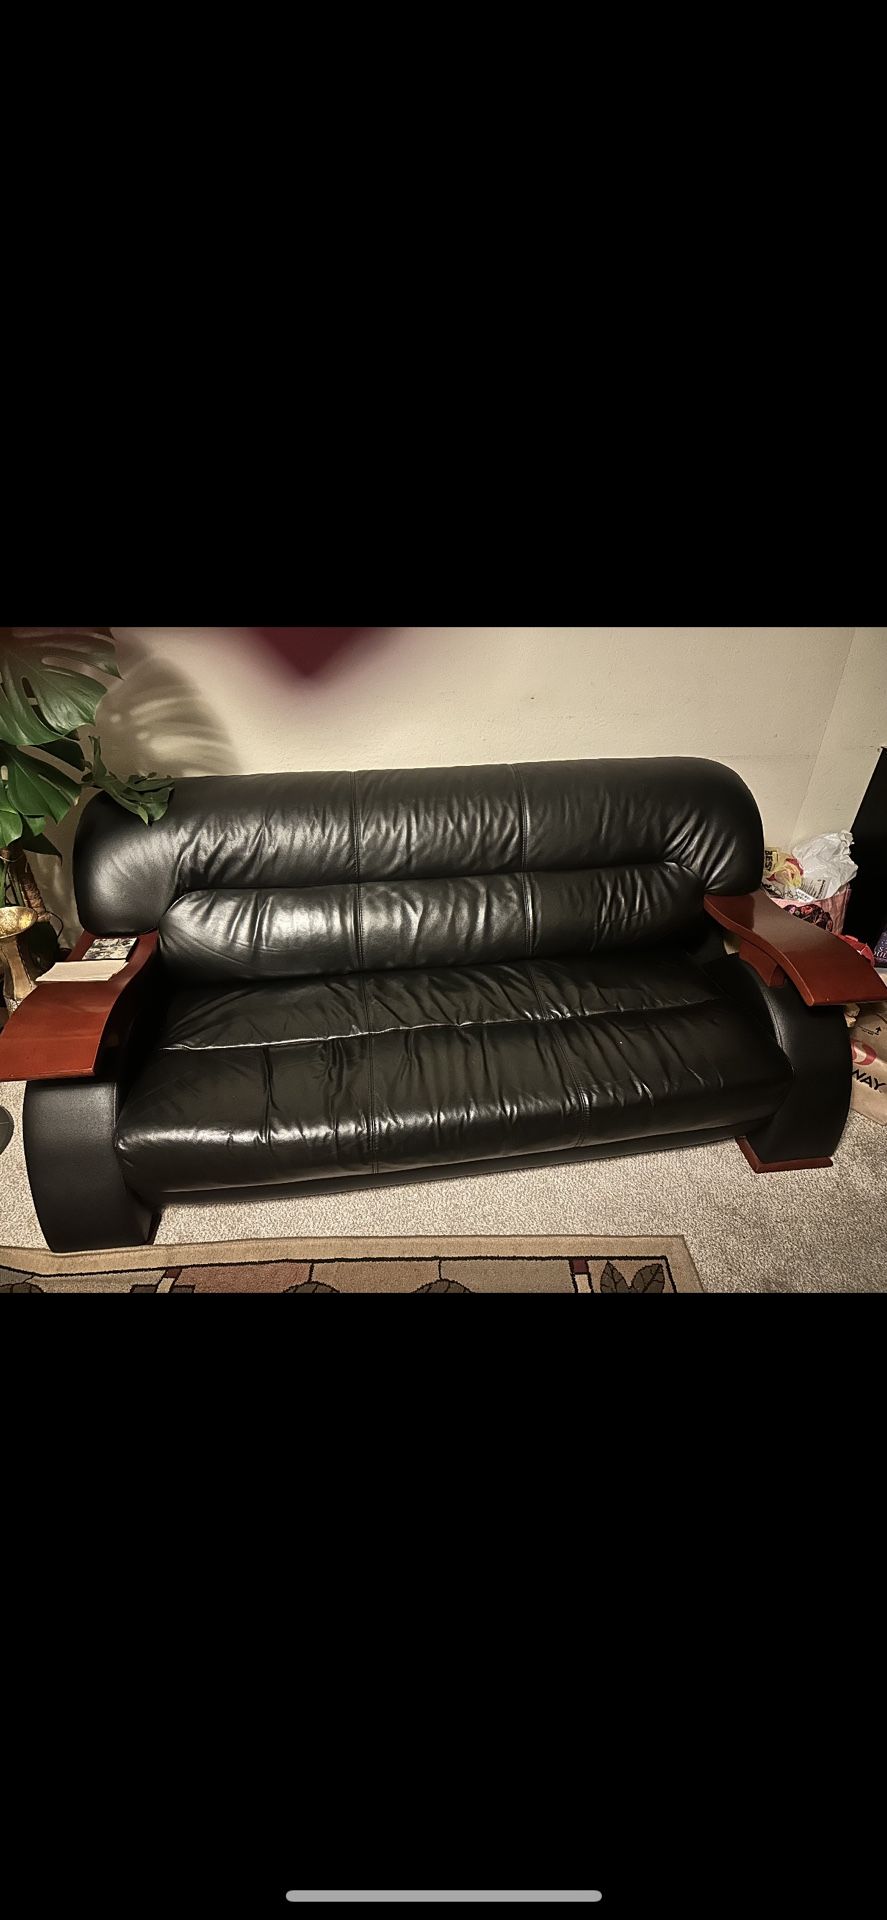 3 Piece Leather Couch Set